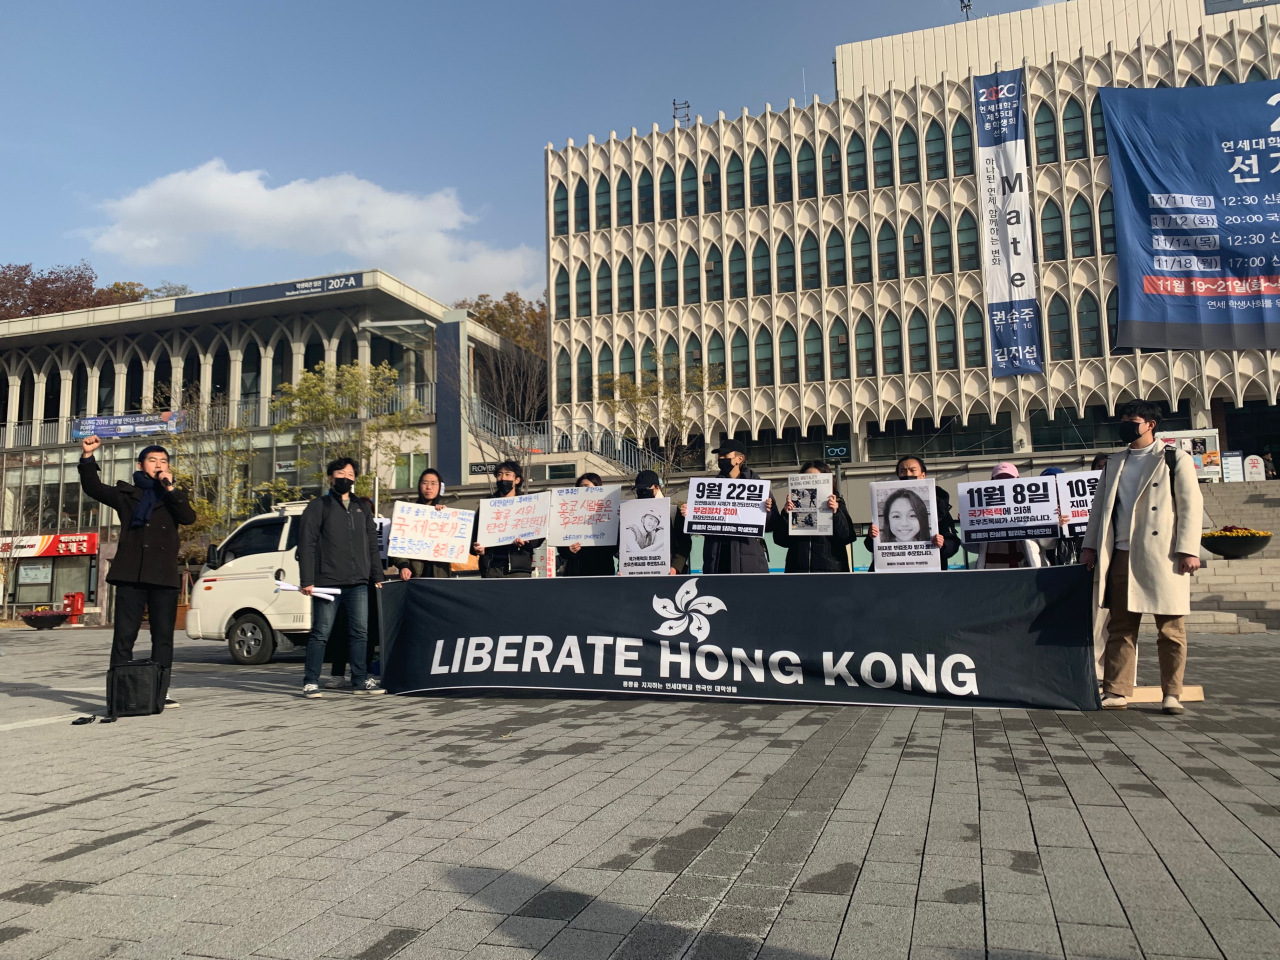 Students march at the Yonsei University campus on Nov. 18 in protest of police brutality at Hong Kong protests, holding a banner that reads, “Liberate Hong Kong.” (Kim Arin/The Korea Herald)